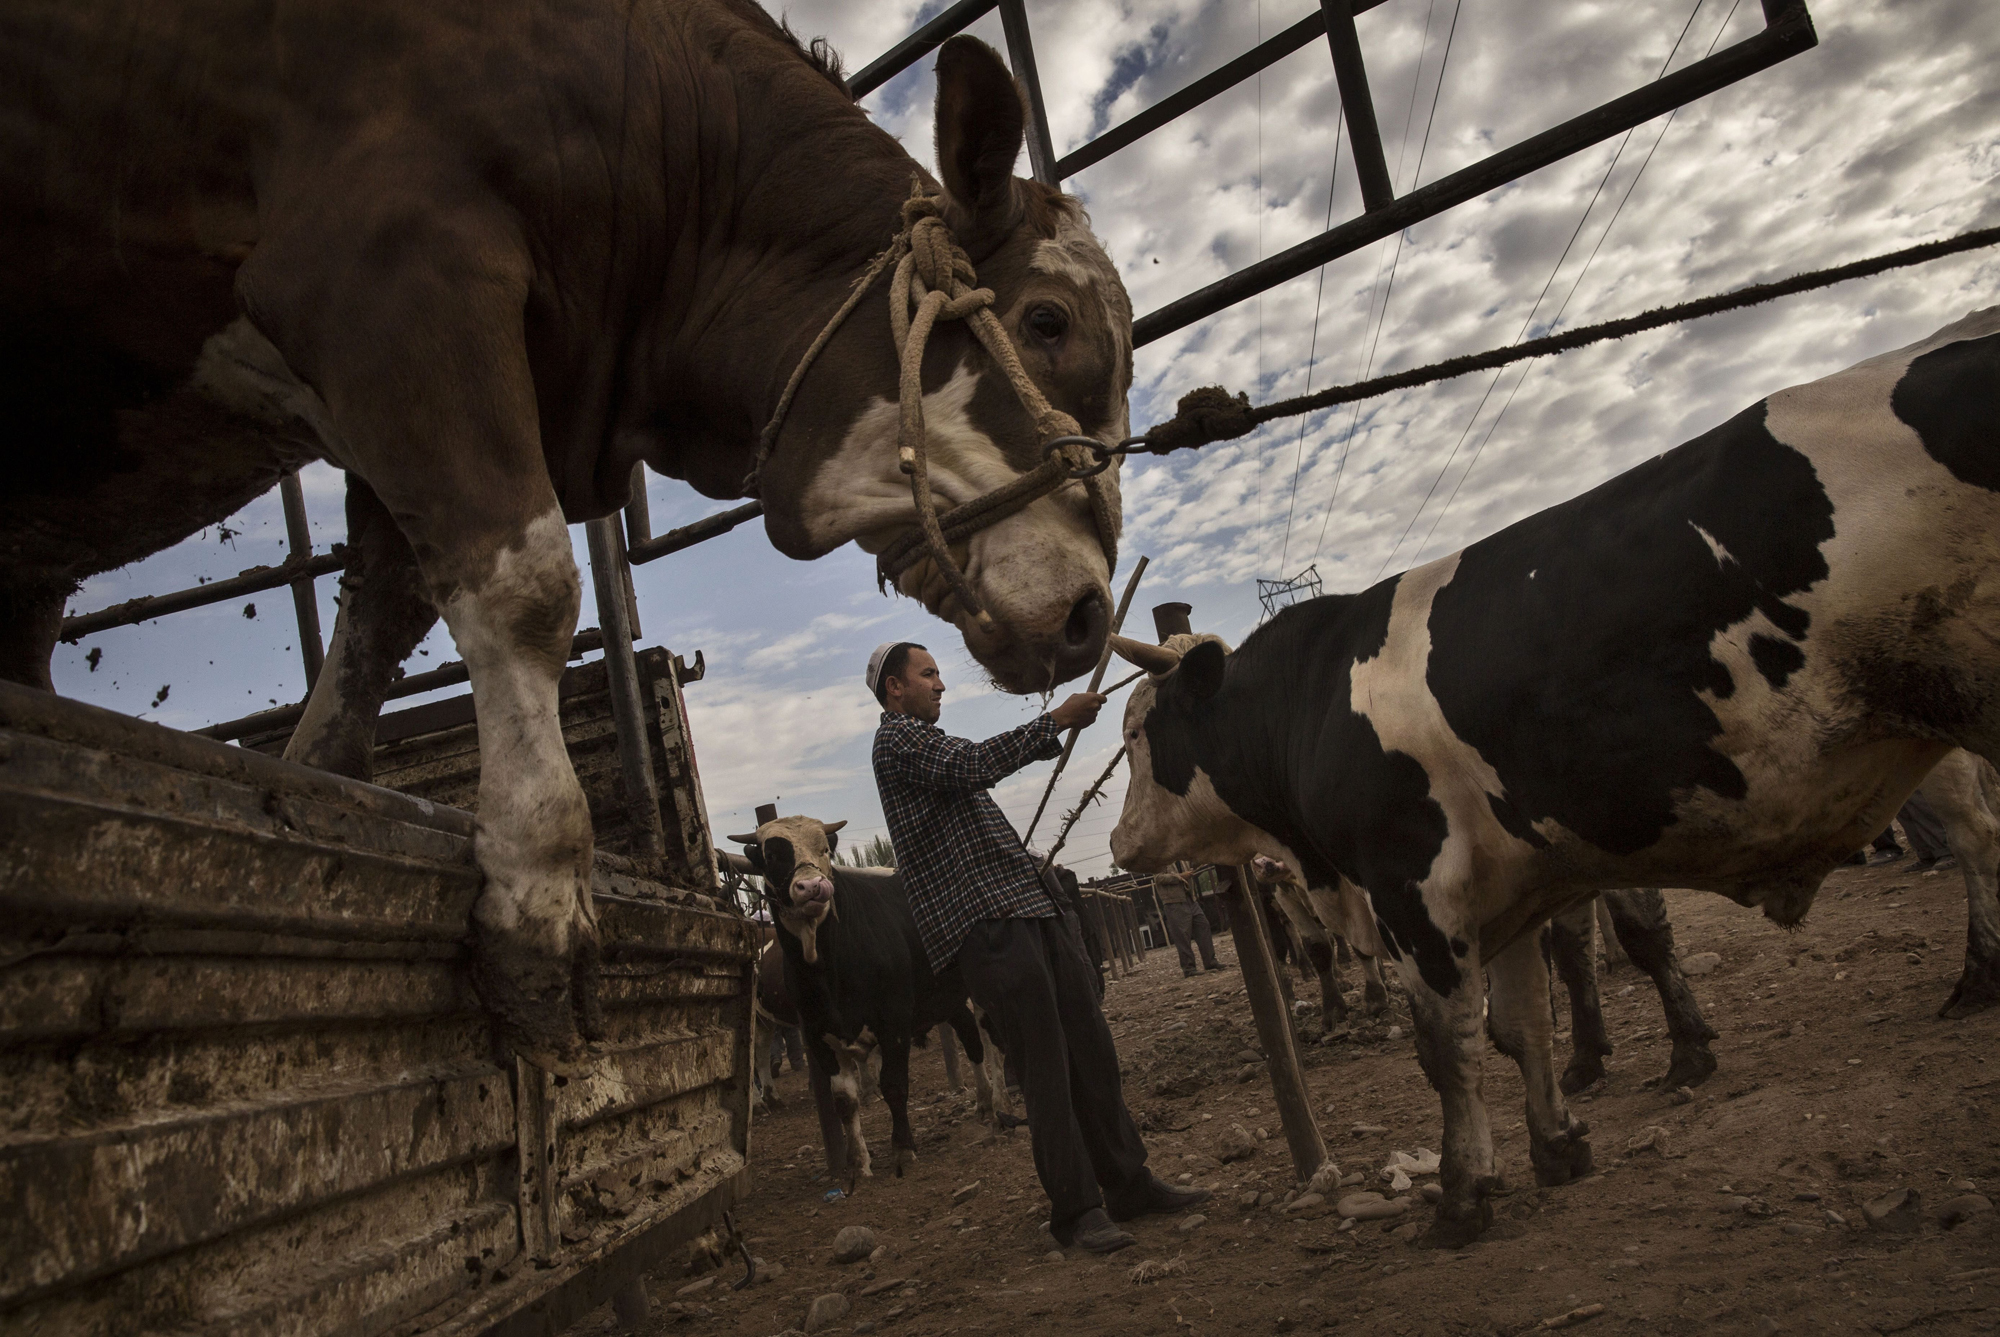 A Uyghur farmer unloads cattle from a truck at a livestock market on August 3, 2014 in Kashgar.